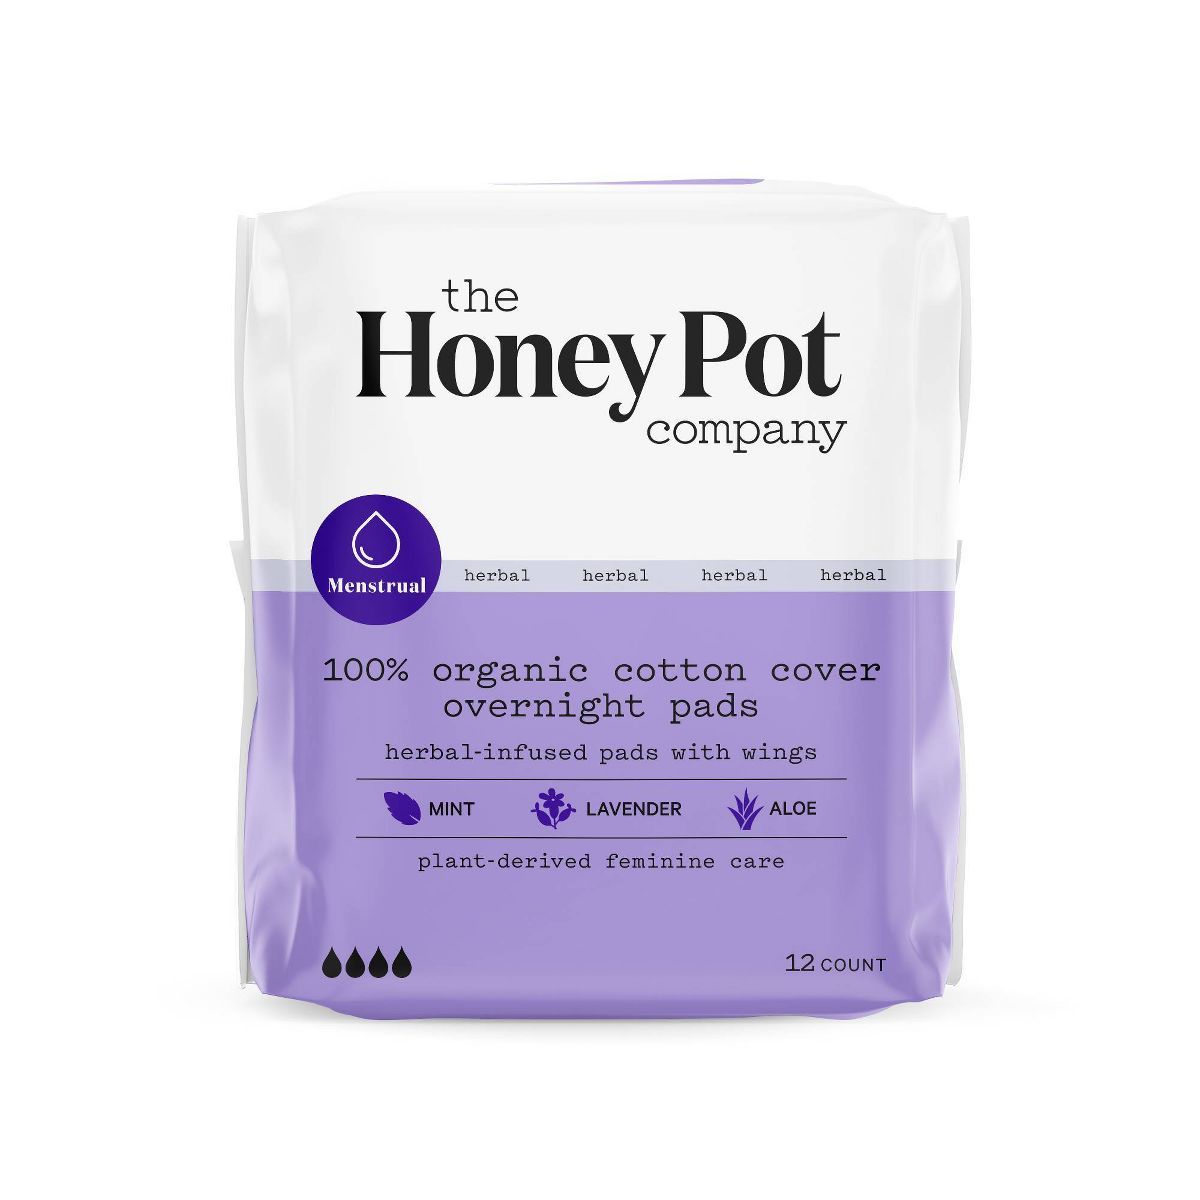 The Honey Pot Company Herbal Overnight Pads with Wings, Organic Cotton Cover - 12ct | Target